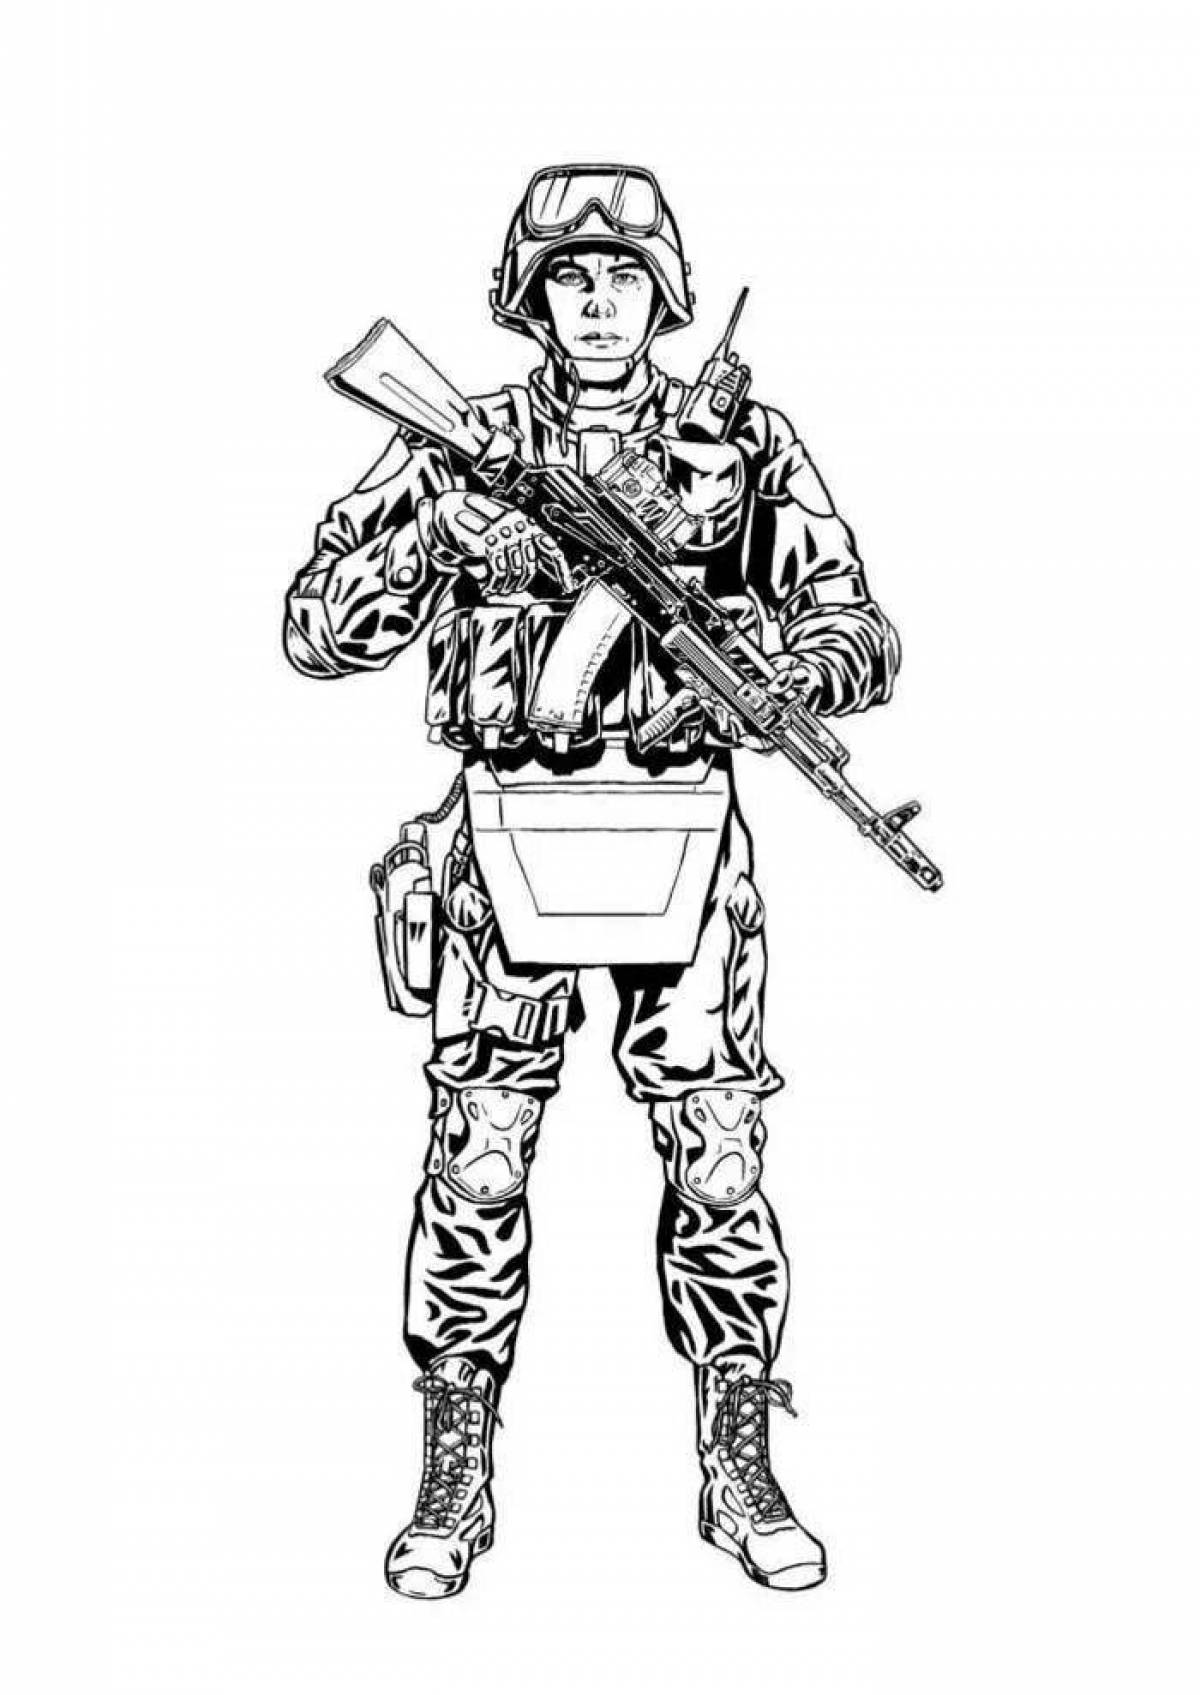 Royal Russian soldier coloring page